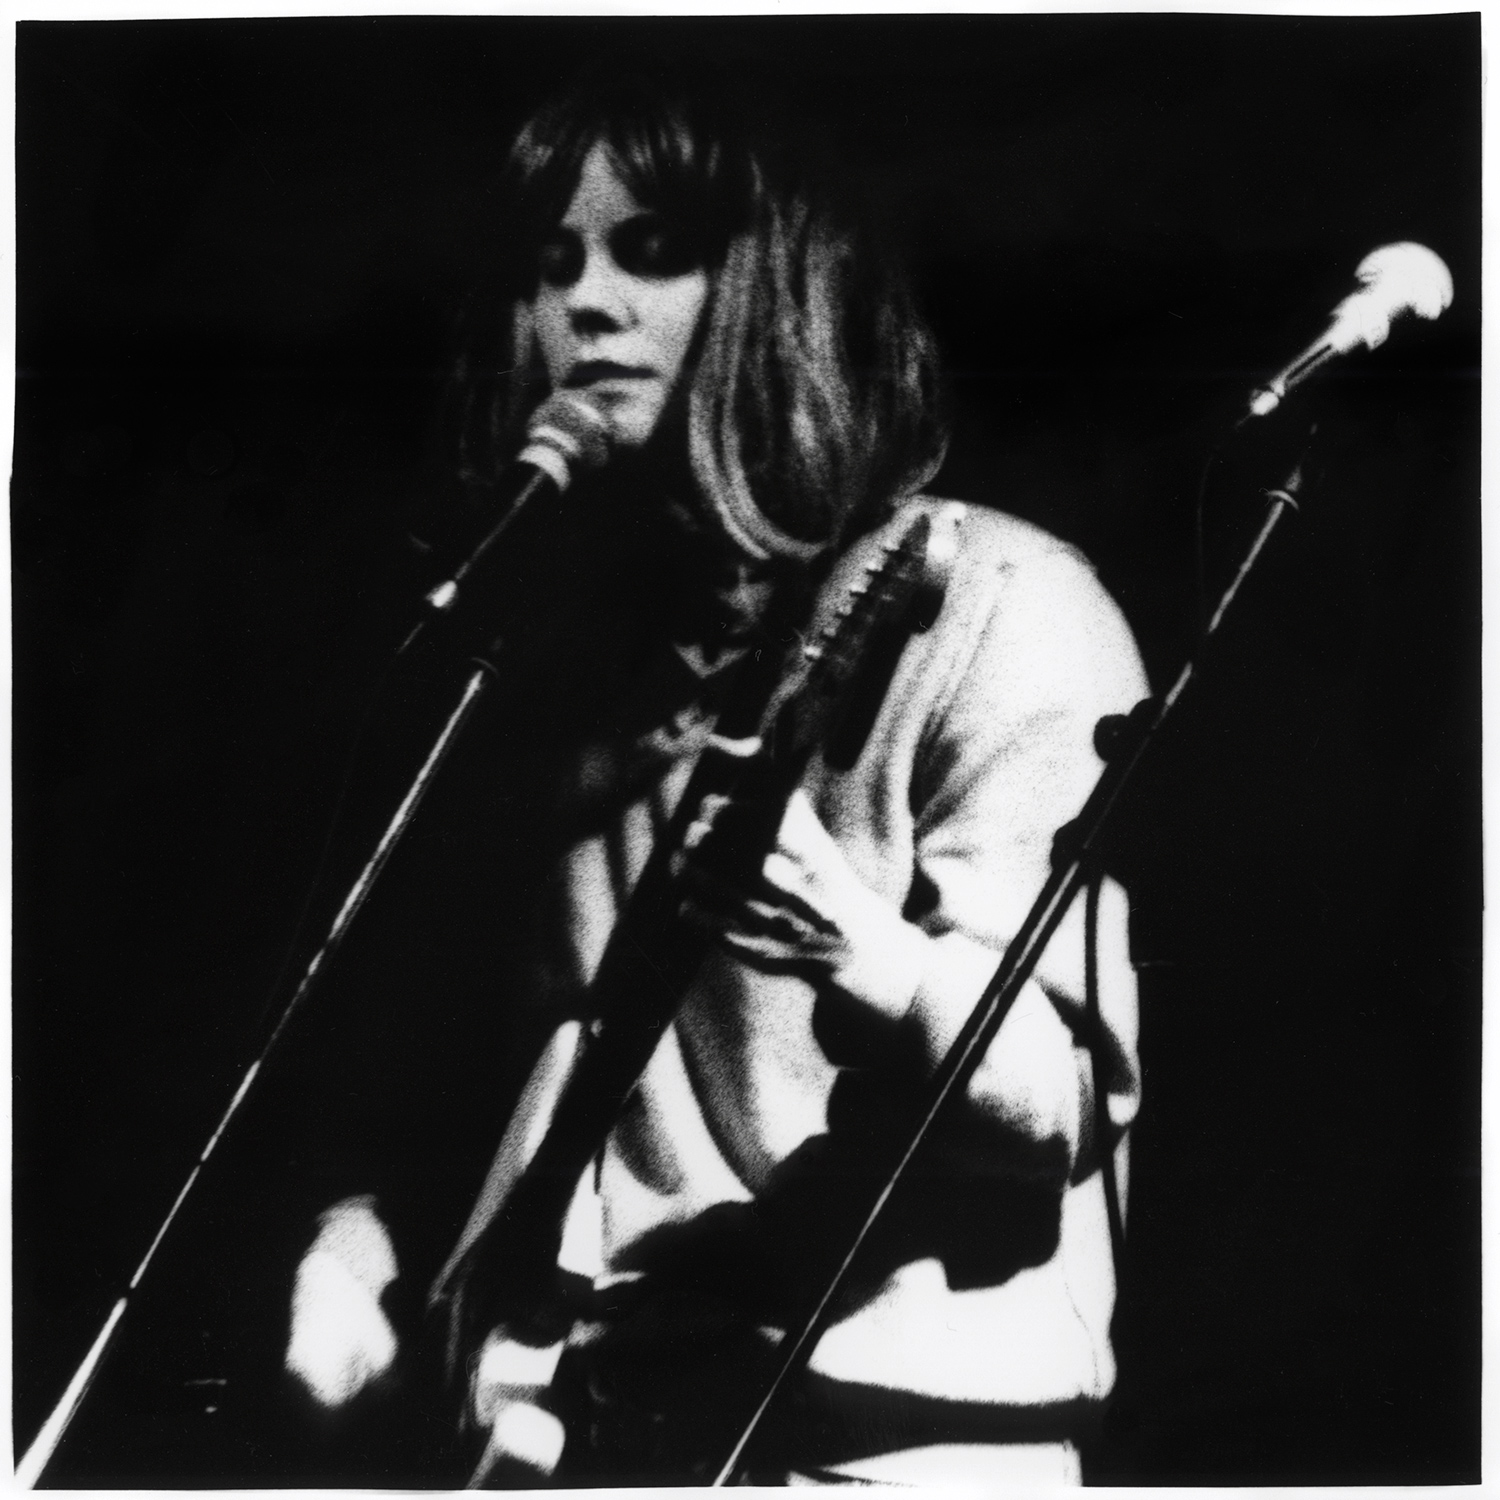 Scout Niblett - Mains d'Oeuvres - 2002 #3